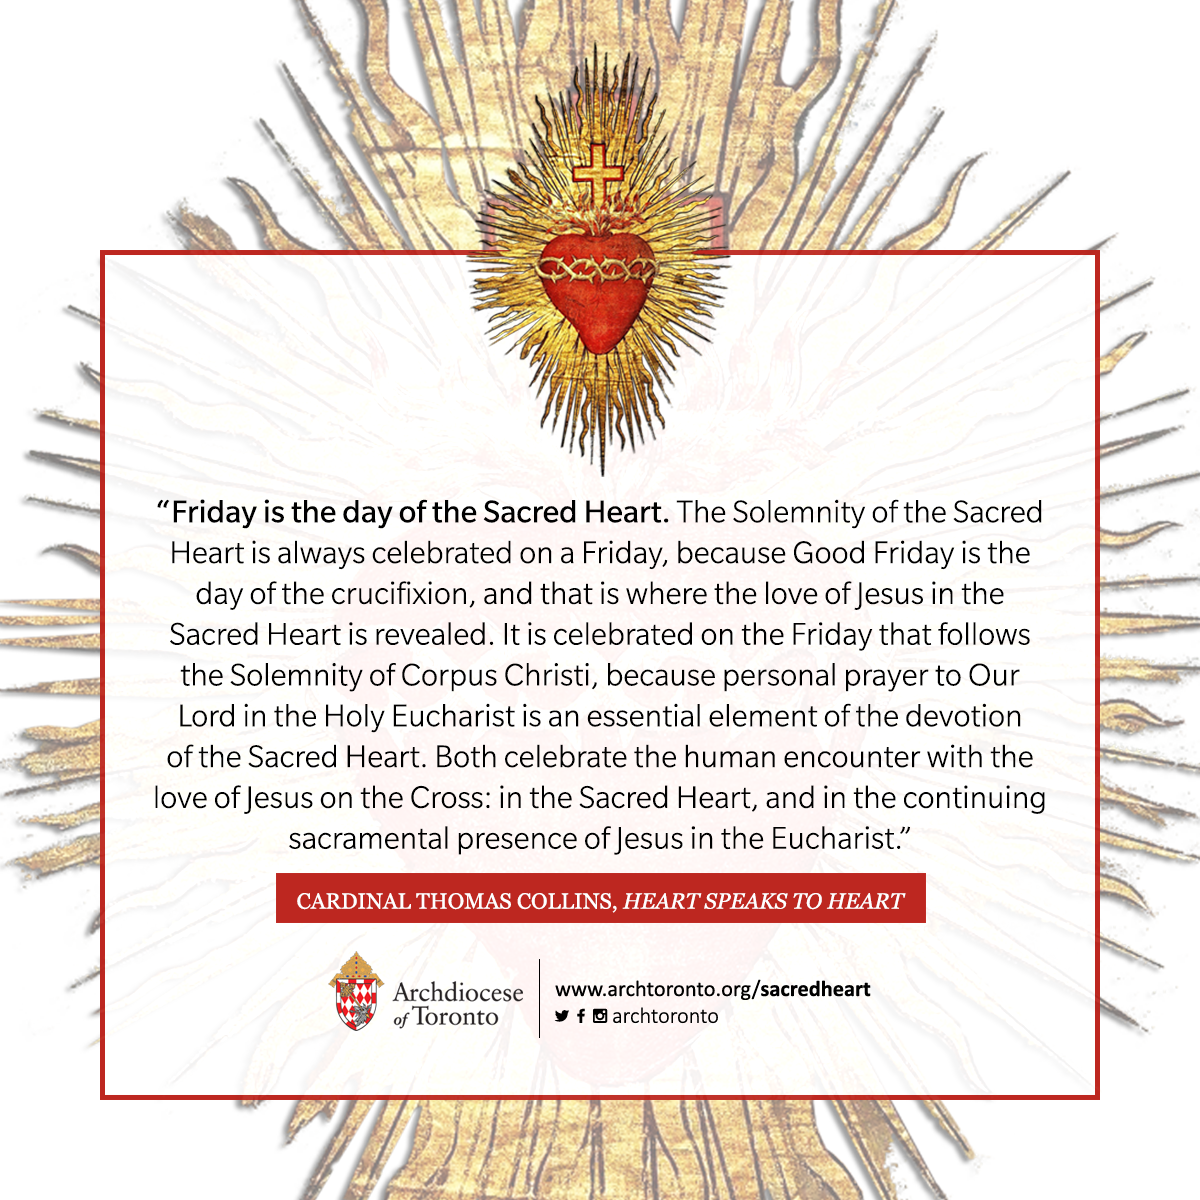 Friday is the day of the Sacred Heart. The Solemnity of the Sacred Heart is always celebrated on a Friday, because Good Friday is the day of the crucifixion, and that is where the love of Jesus in the Sacred Heart is revealed. It is celebrated on the Friday that follows the Solemnity of Corpus Christi, because personal prayer to Our Lord in the Holy Eucharist is an essential element of the devotion of the Sacred Heart. Both celebrate the human encounter with the love of Jesus on the Cross: in the Sacred Heart, and in the continuing sacramental presence of Jesus in the Eucharist.